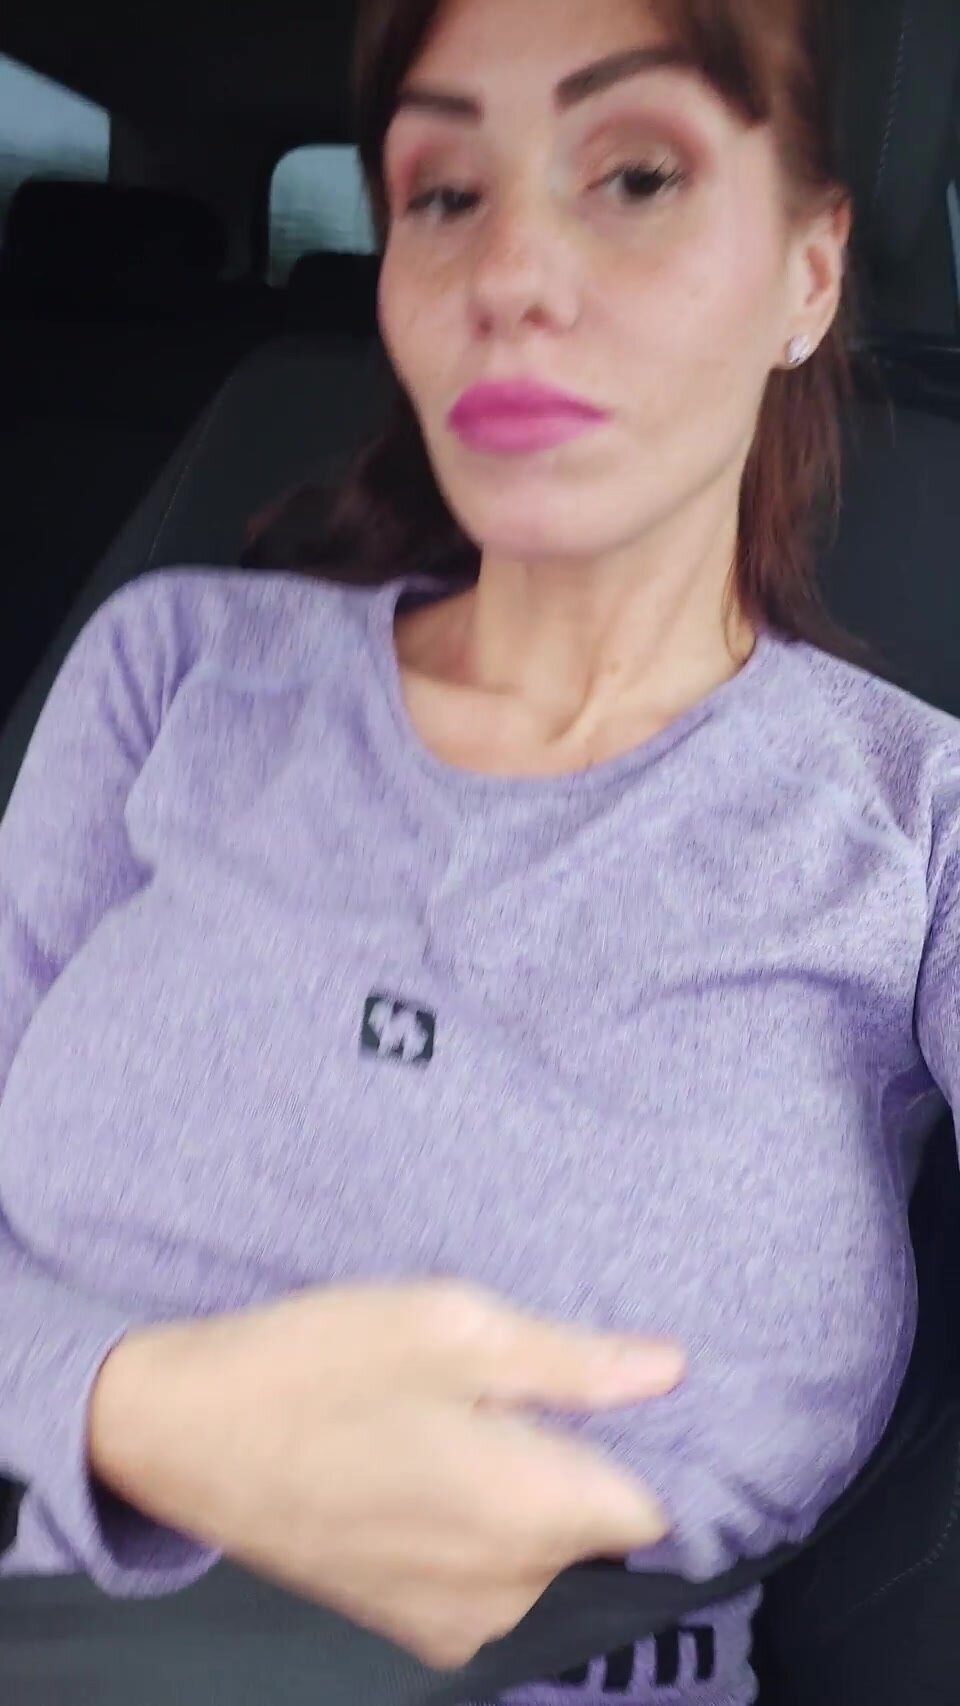 What if my husband drove me to your house and then you fucked me?